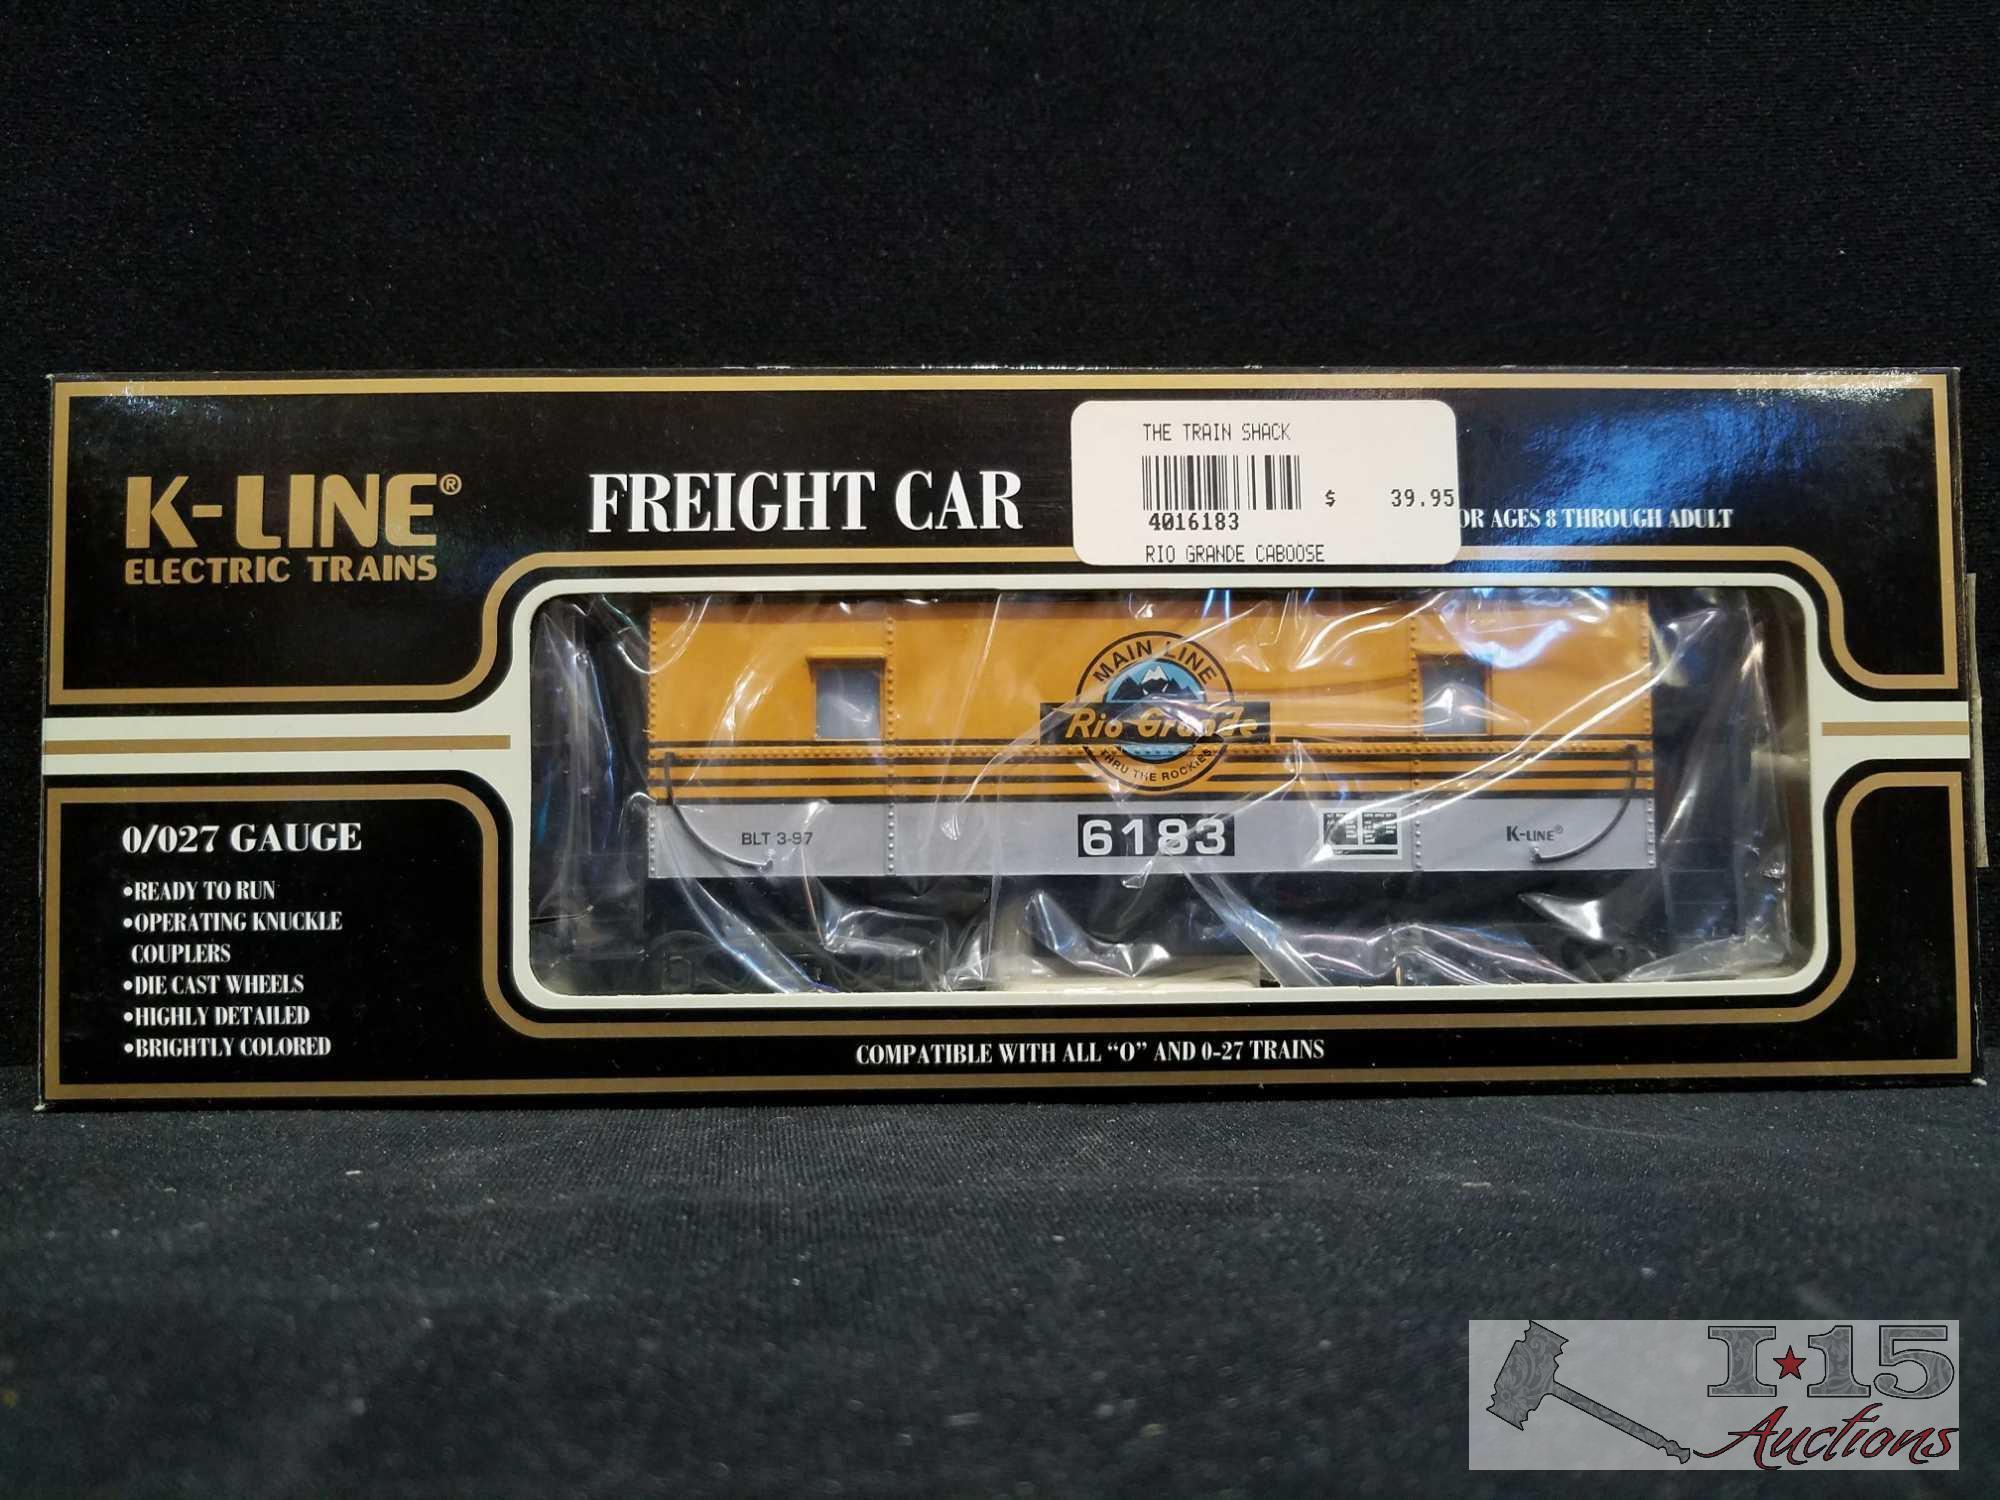 5 K-Line Freight Cars